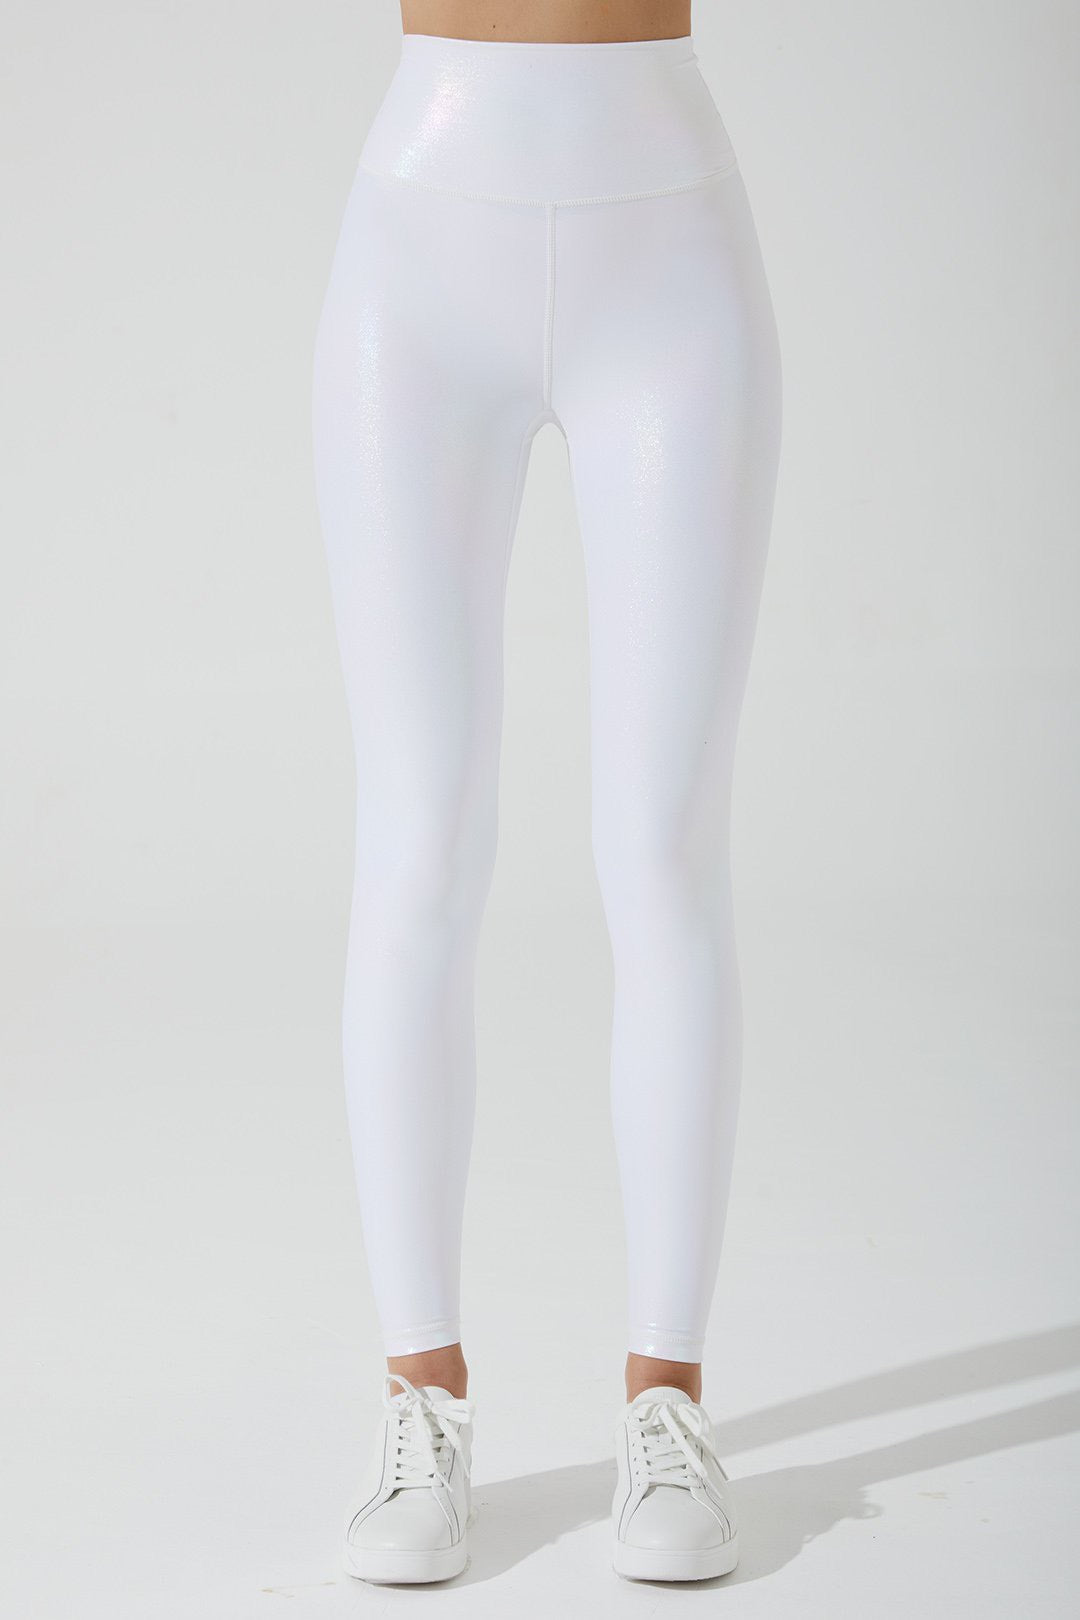 The elusive, pearly-white sheen of these iridescent leggings is